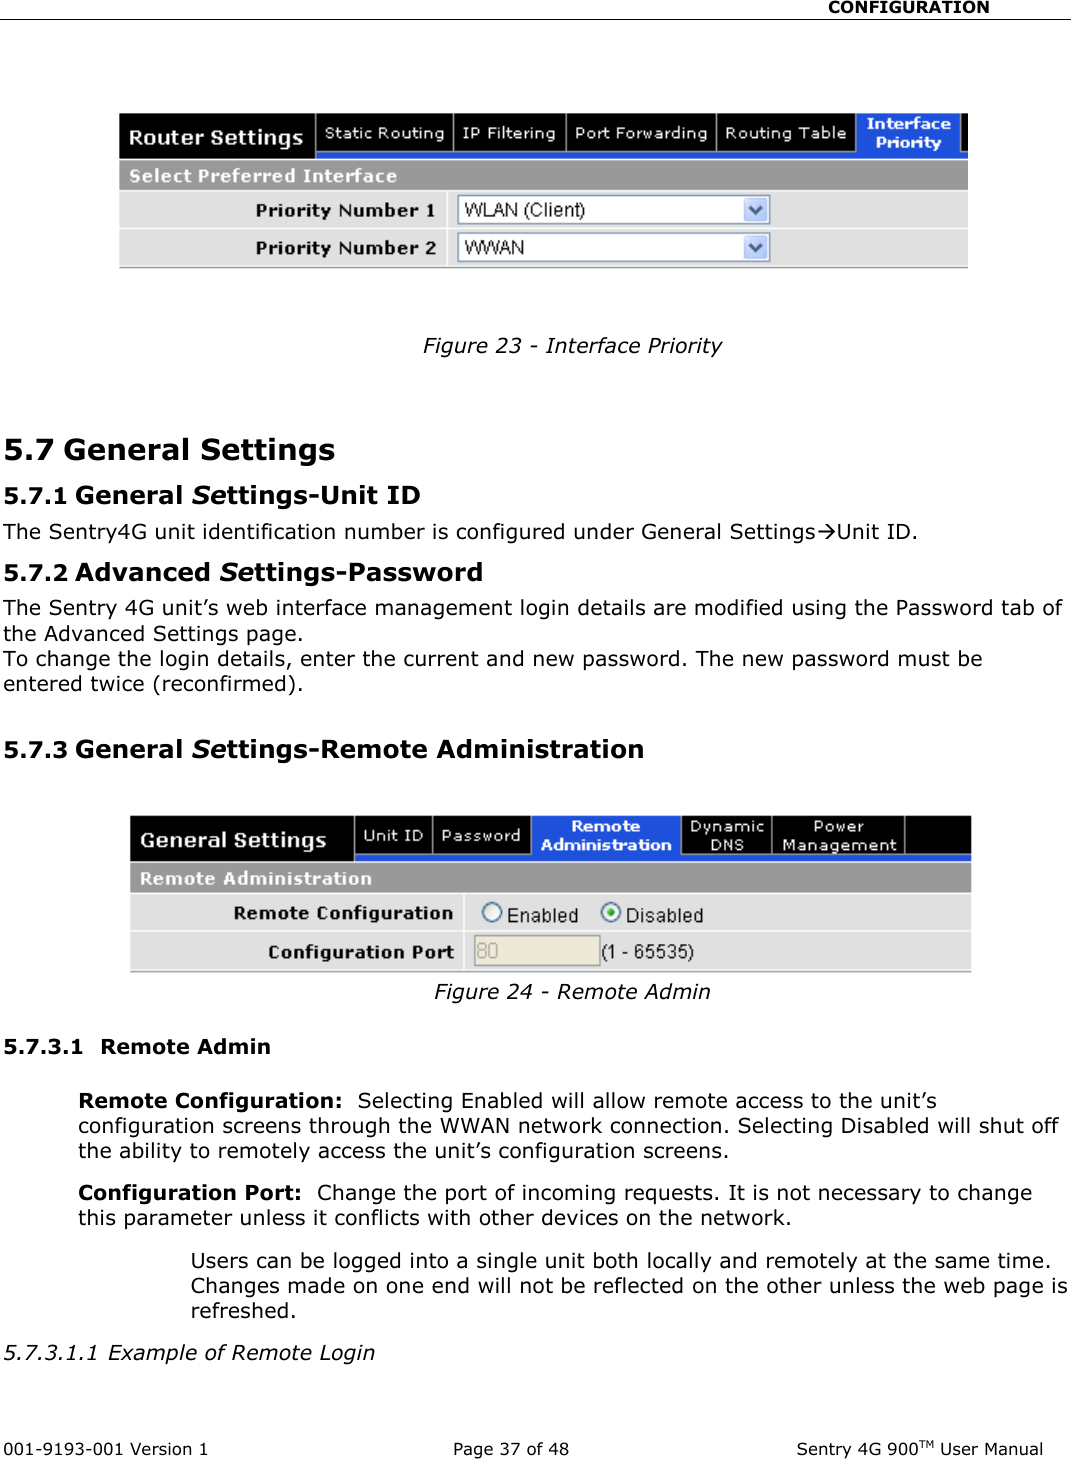                                                       CONFIGURATION  001-9193-001 Version 1              Page 37 of 48               Sentry 4G 900TM User Manual    Figure 23 - Interface Priority   5.7 General Settings  5.7.1 General Settings-Unit ID The Sentry4G unit identification number is configured under General SettingsUnit ID. 5.7.2 Advanced Settings-Password The Sentry 4G unit’s web interface management login details are modified using the Password tab of the Advanced Settings page. To change the login details, enter the current and new password. The new password must be entered twice (reconfirmed).  5.7.3 General Settings-Remote Administration  Figure 24 - Remote Admin  5.7.3.1  Remote Admin  Remote Configuration:  Selecting Enabled will allow remote access to the unit’s configuration screens through the WWAN network connection. Selecting Disabled will shut off the ability to remotely access the unit’s configuration screens. Configuration Port:  Change the port of incoming requests. It is not necessary to change this parameter unless it conflicts with other devices on the network.   Users can be logged into a single unit both locally and remotely at the same time.  Changes made on one end will not be reflected on the other unless the web page is refreshed.   5.7.3.1.1 Example of Remote Login  